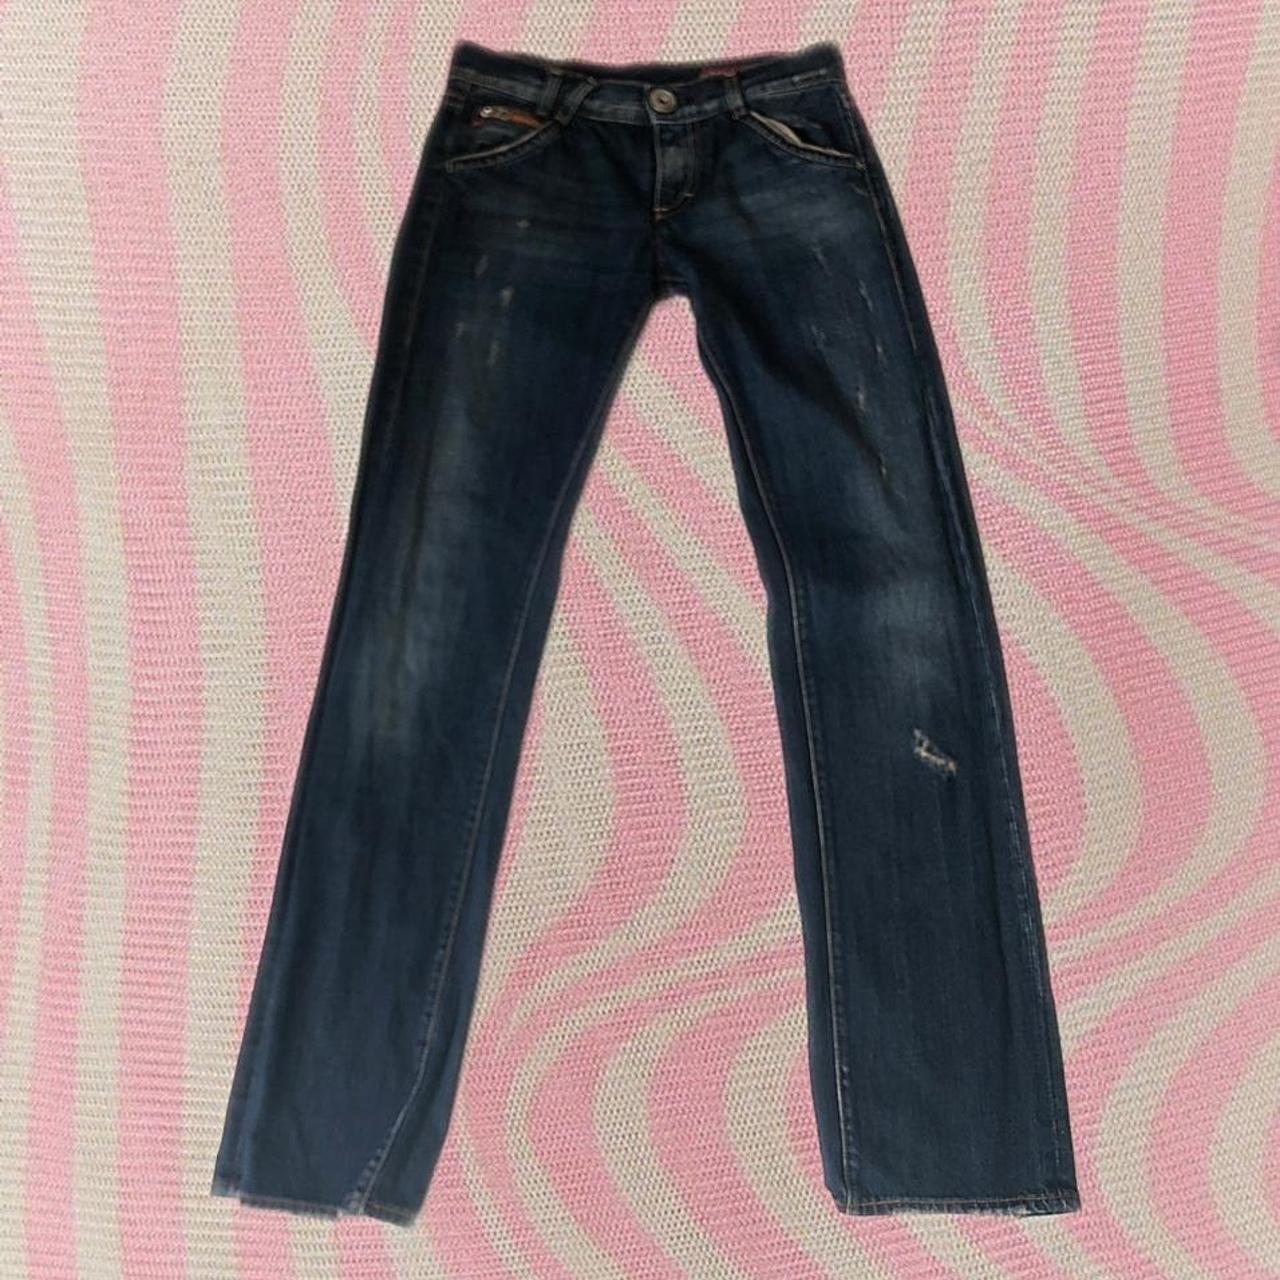 Product Image 2 - MISS SIXTY LOW RISE JEANS!